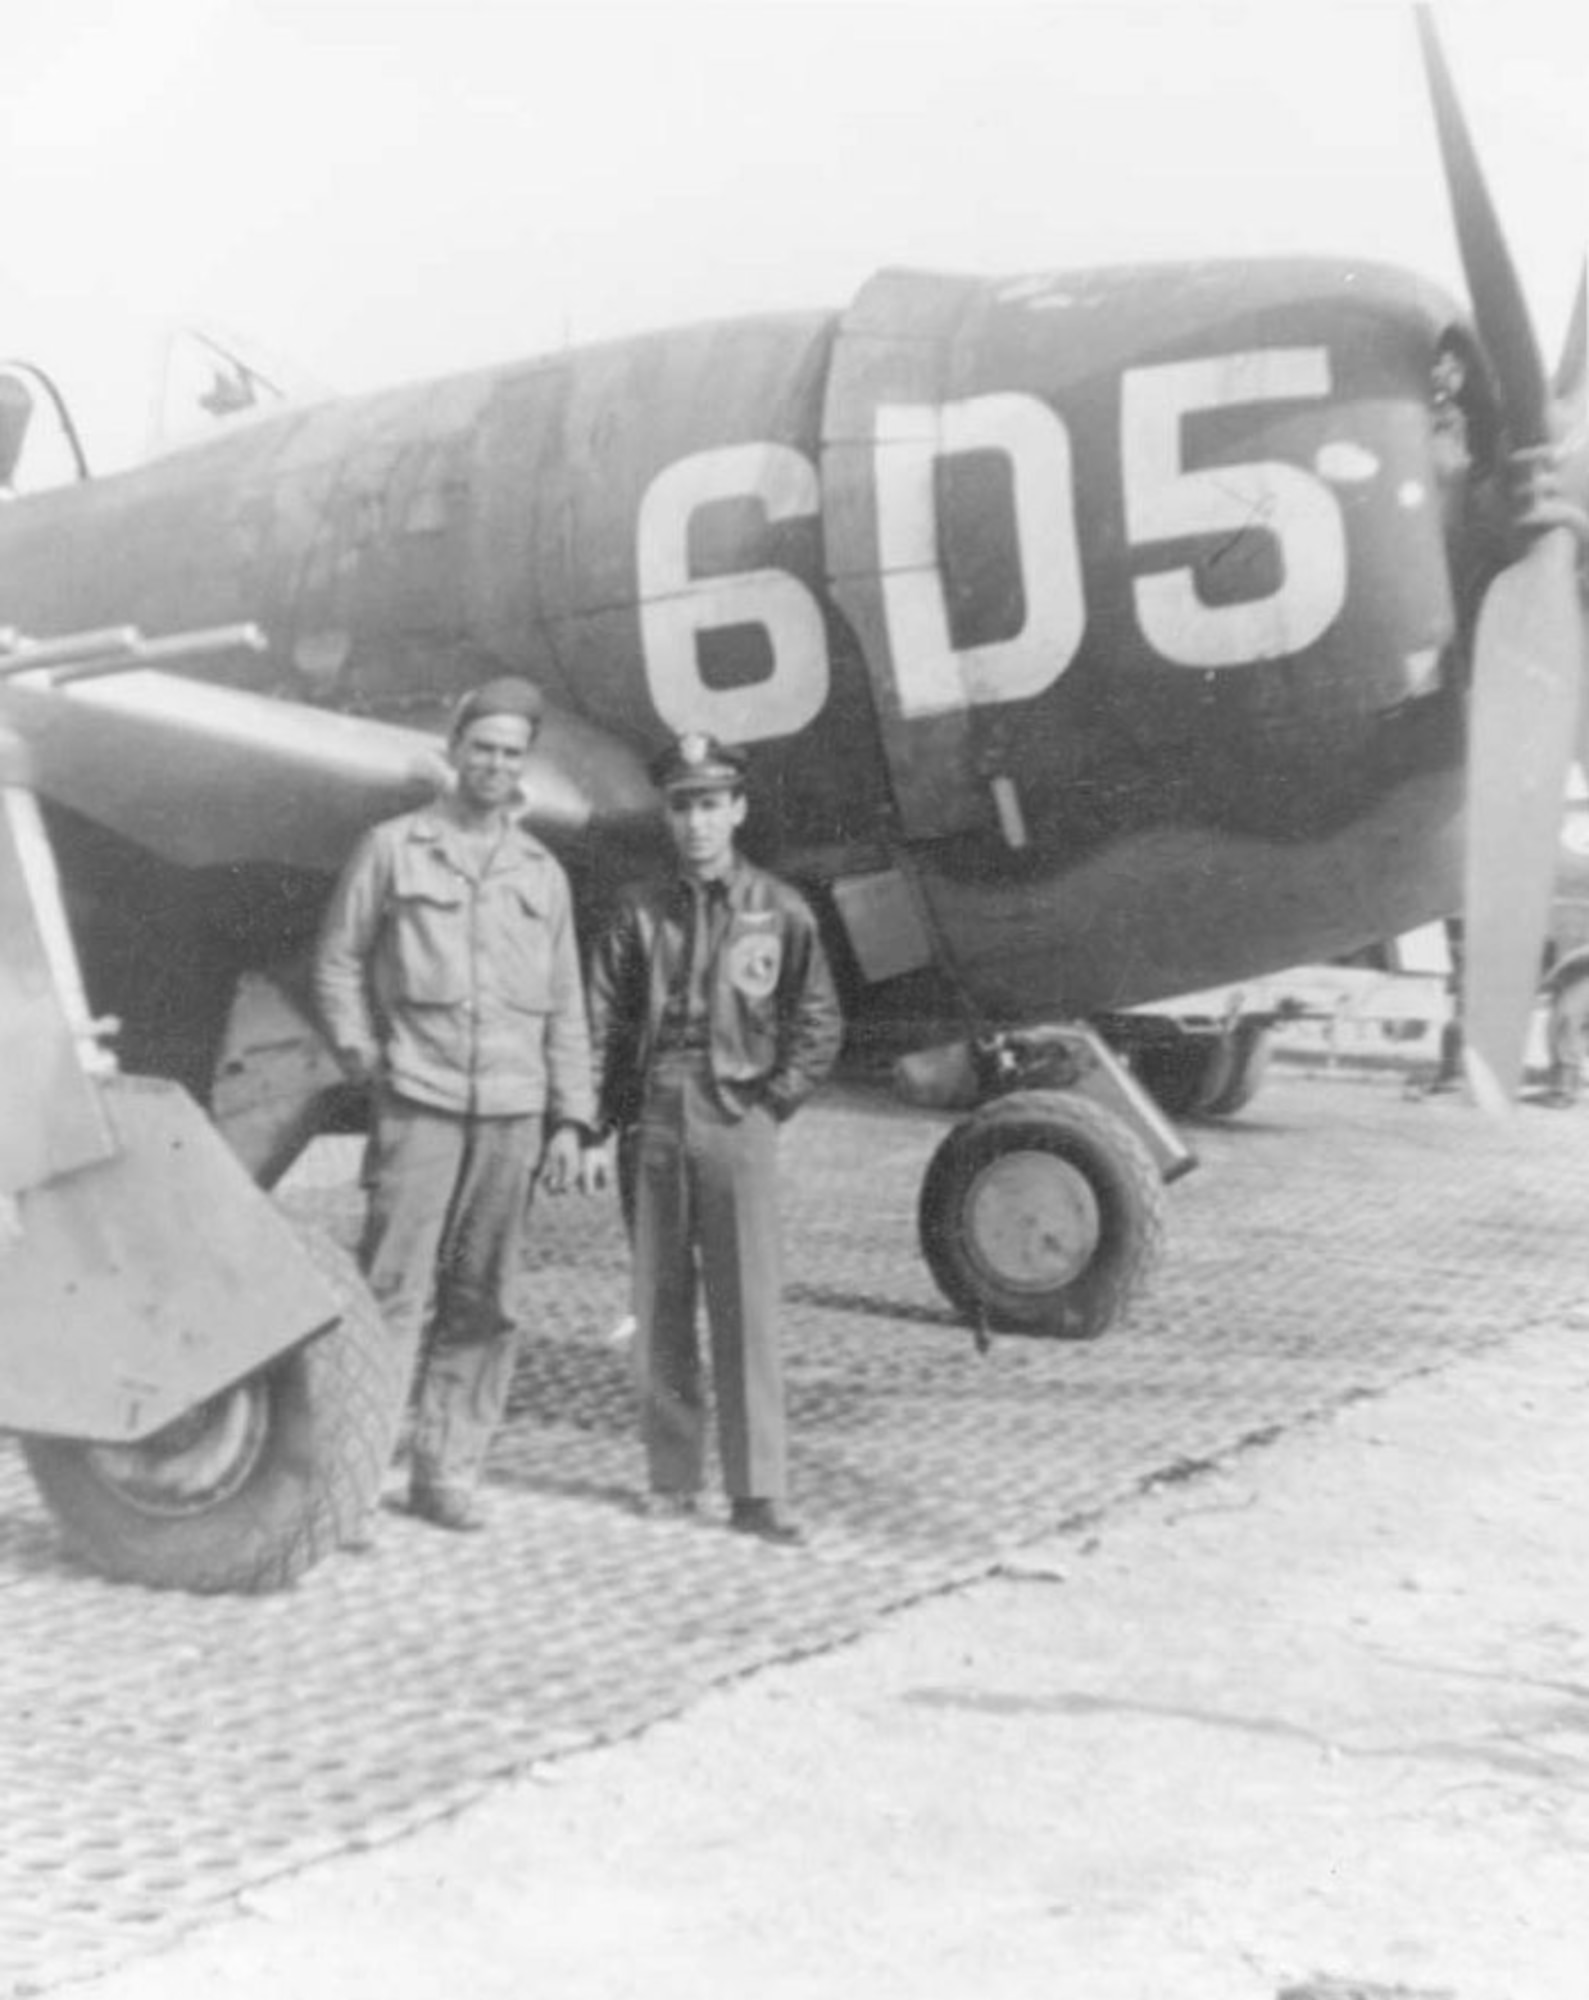 1Lt. Raymond L. Knight with his crew chief, Sgt. Marvin Childers. The aircraft pictured is the one Lt. Knight flew on his Medal of Honor mission in April 1945. (U.S. Air Force photo)